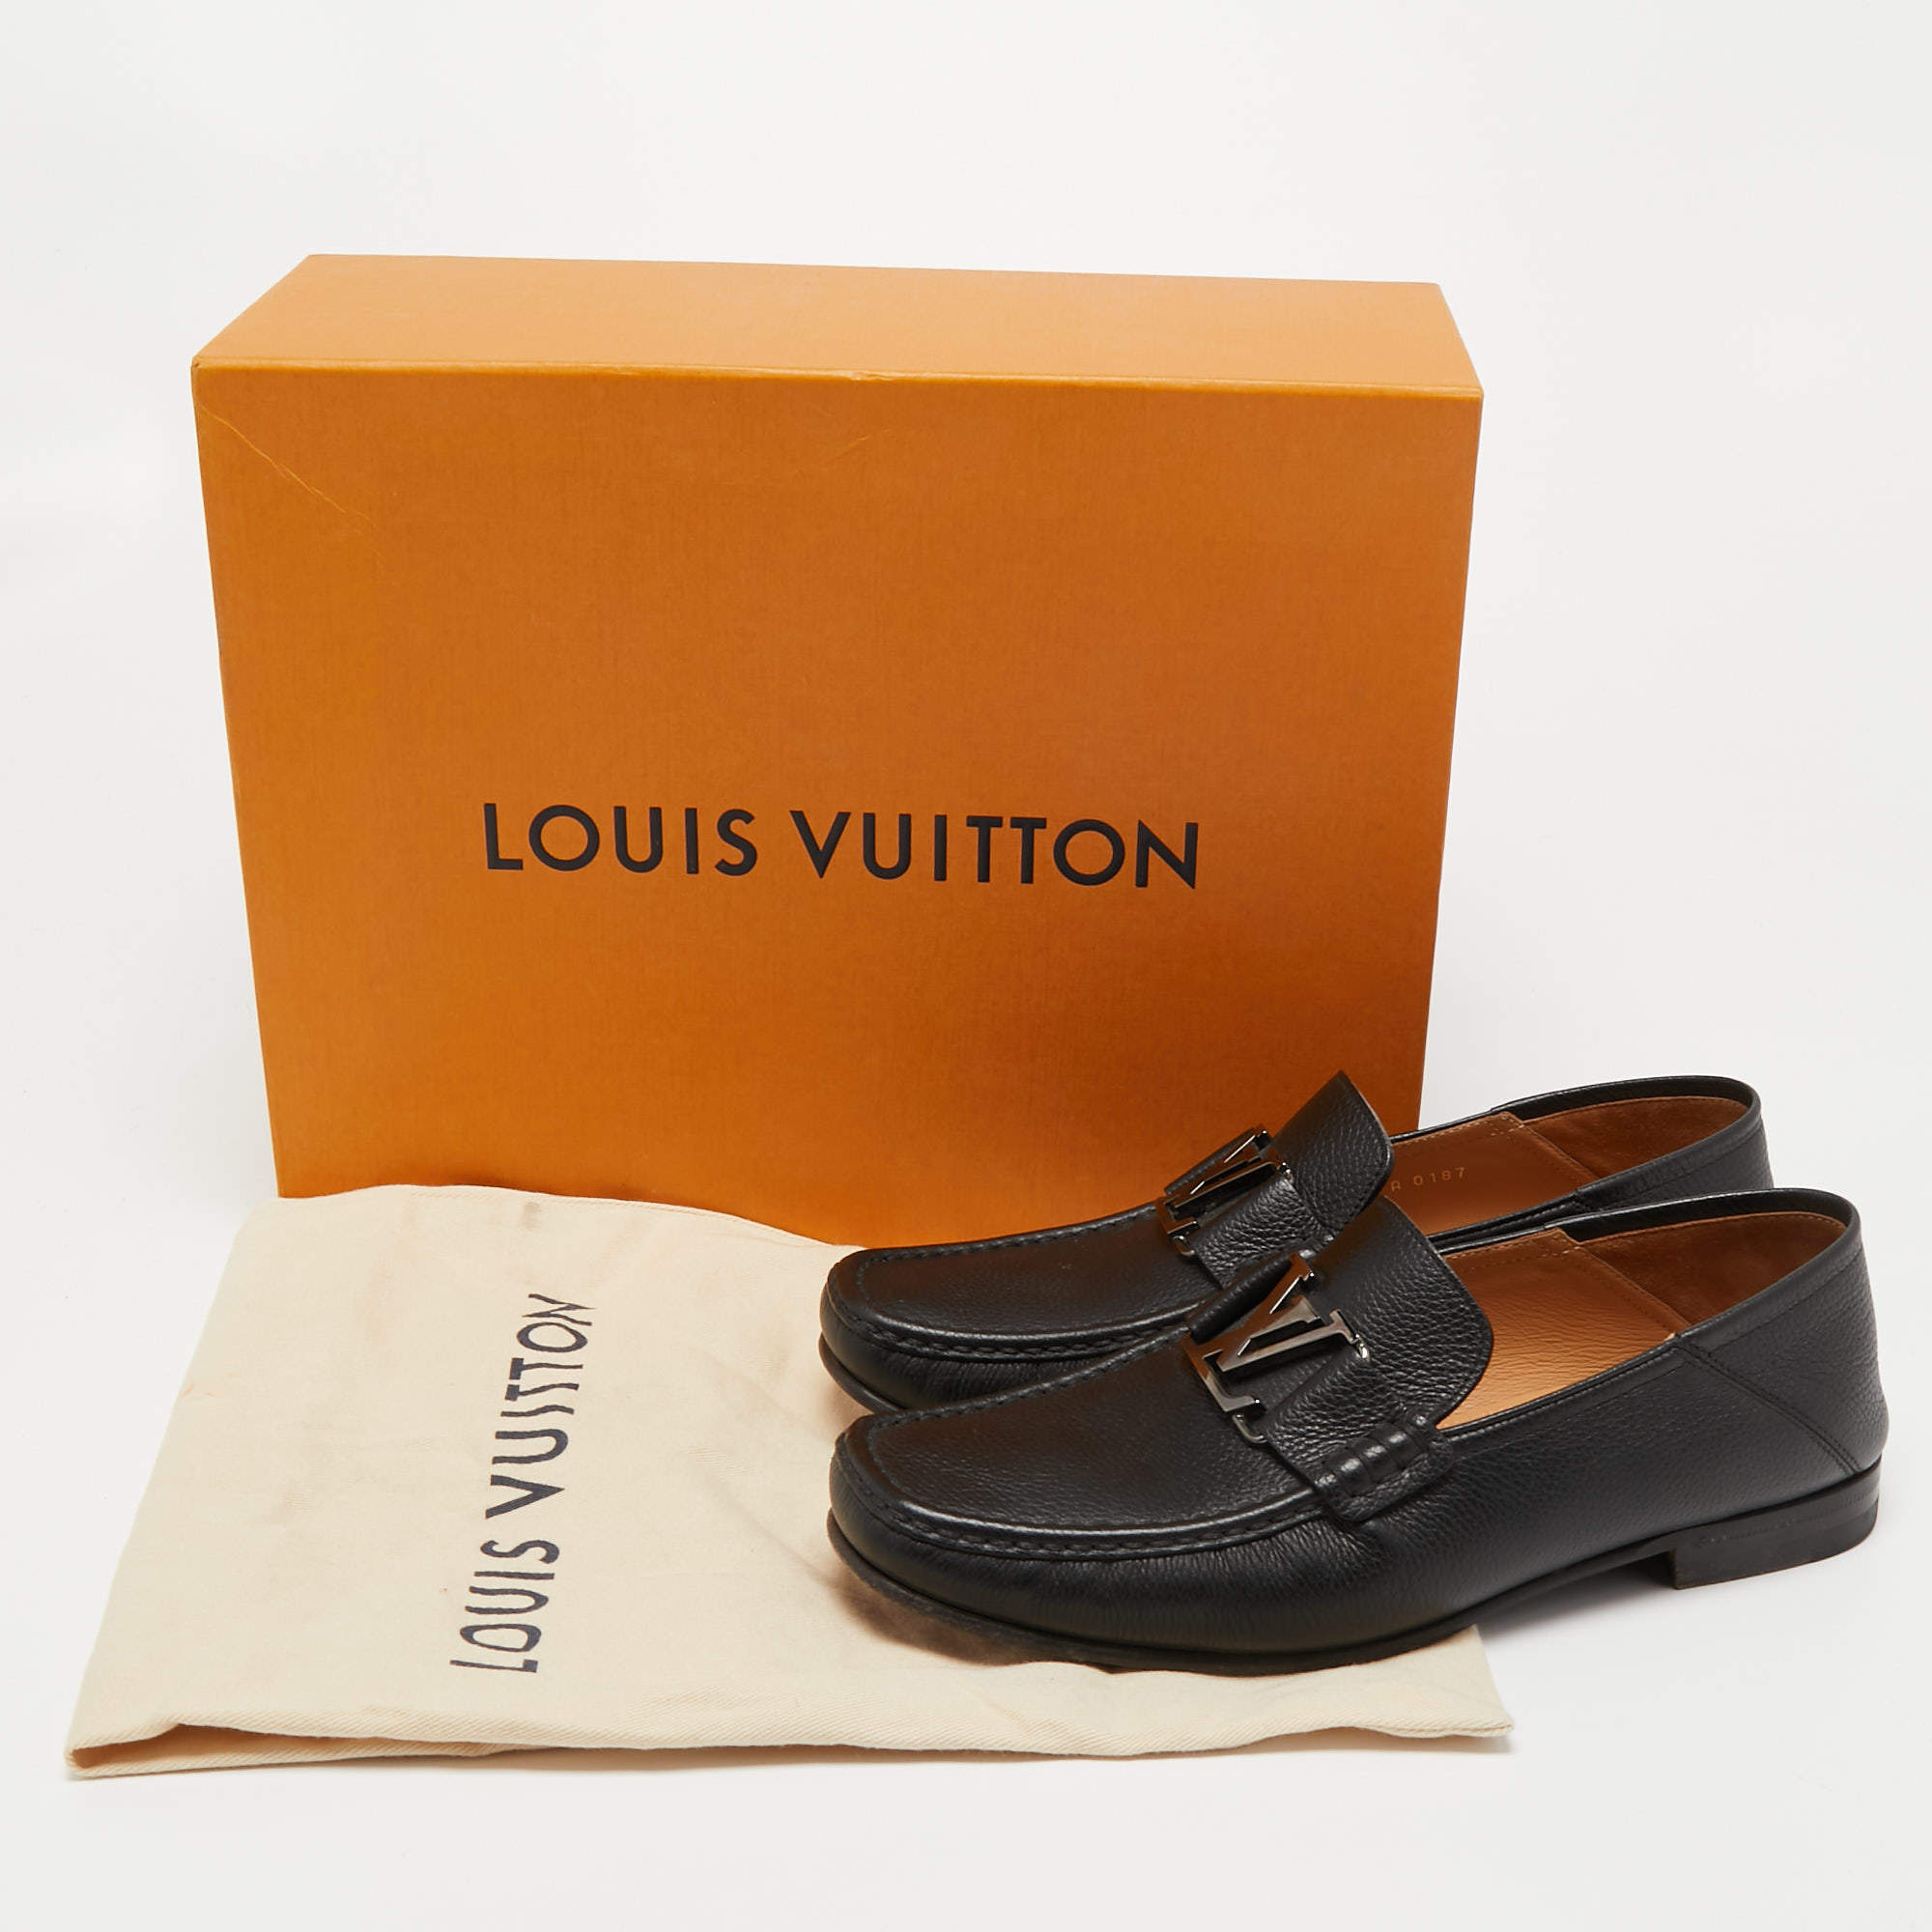 Monte carlo leather flats Louis Vuitton Blue size 40 EU in Leather -  31336160